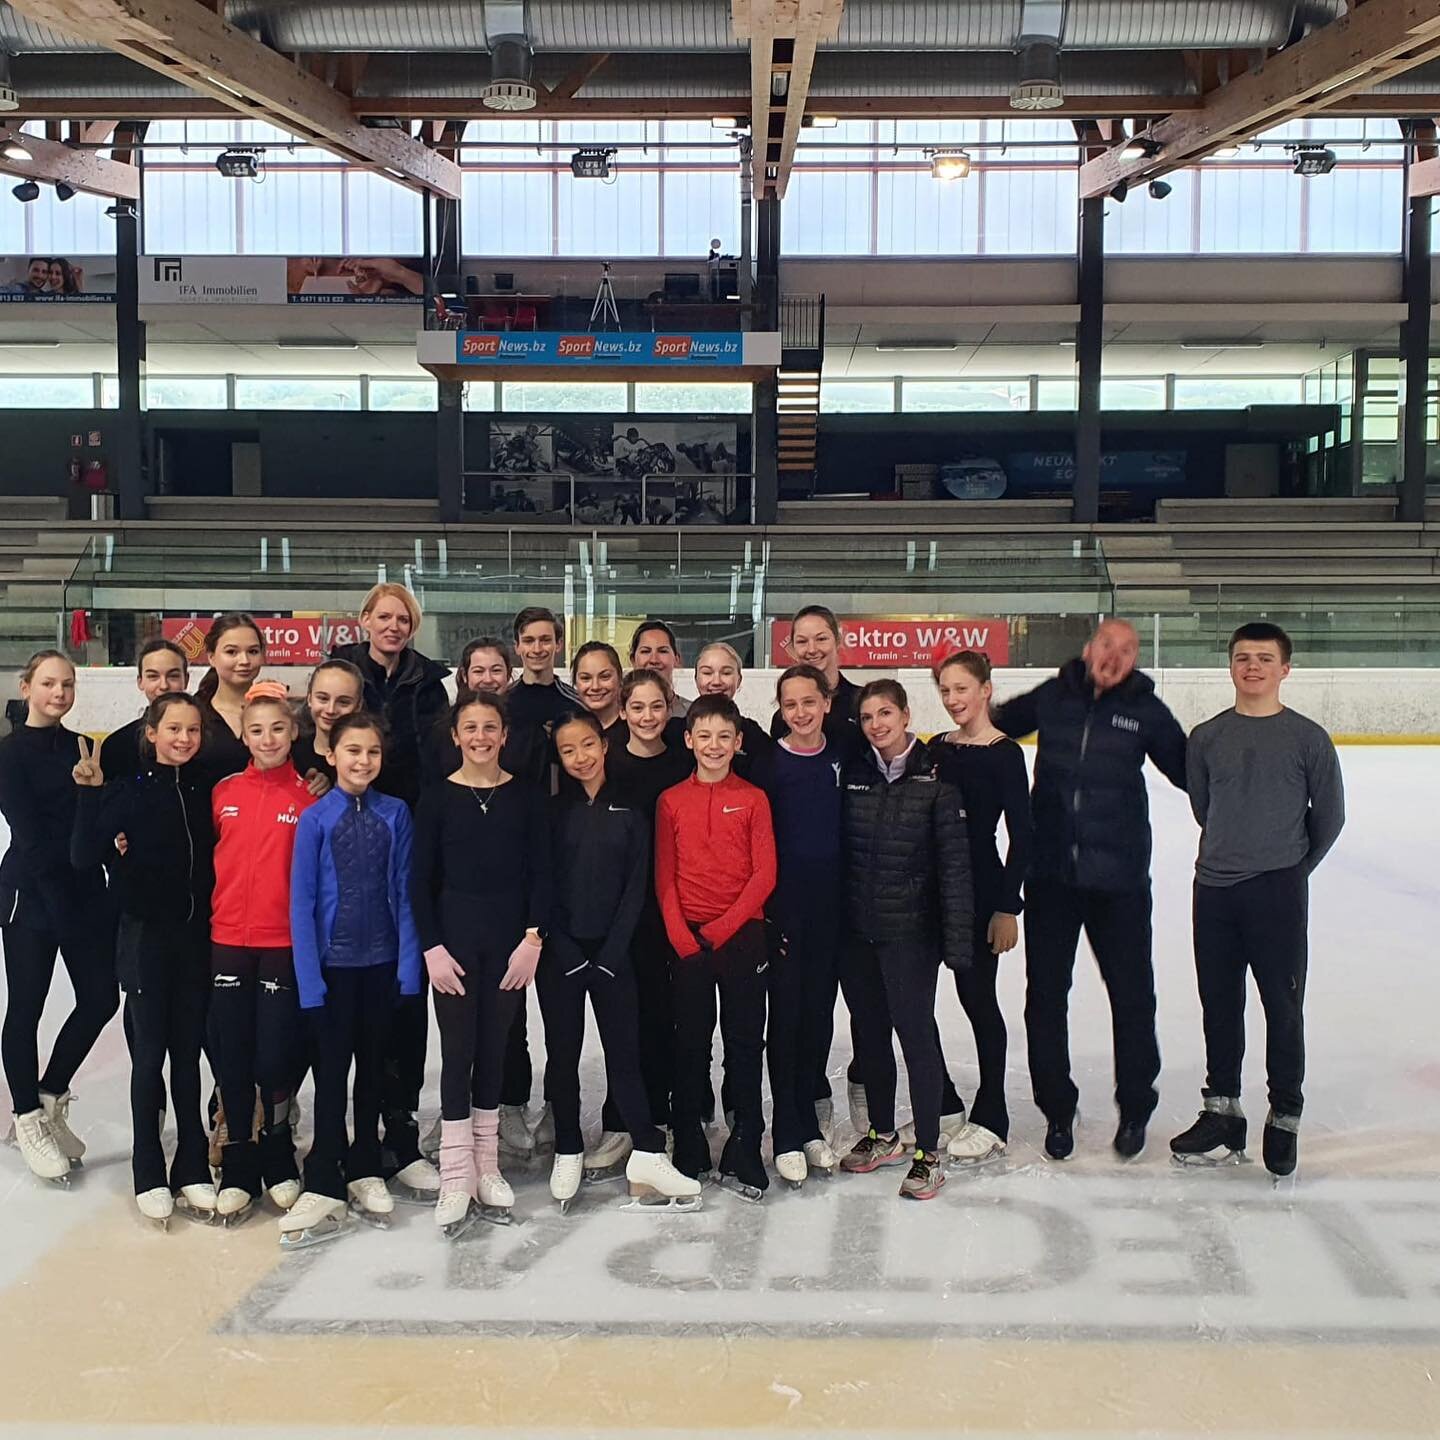 Thanks to @young.goose.academy.official for having @skateacademyswitzerland as guest. Lots of new friendships and great experience! See you soon 👋😎